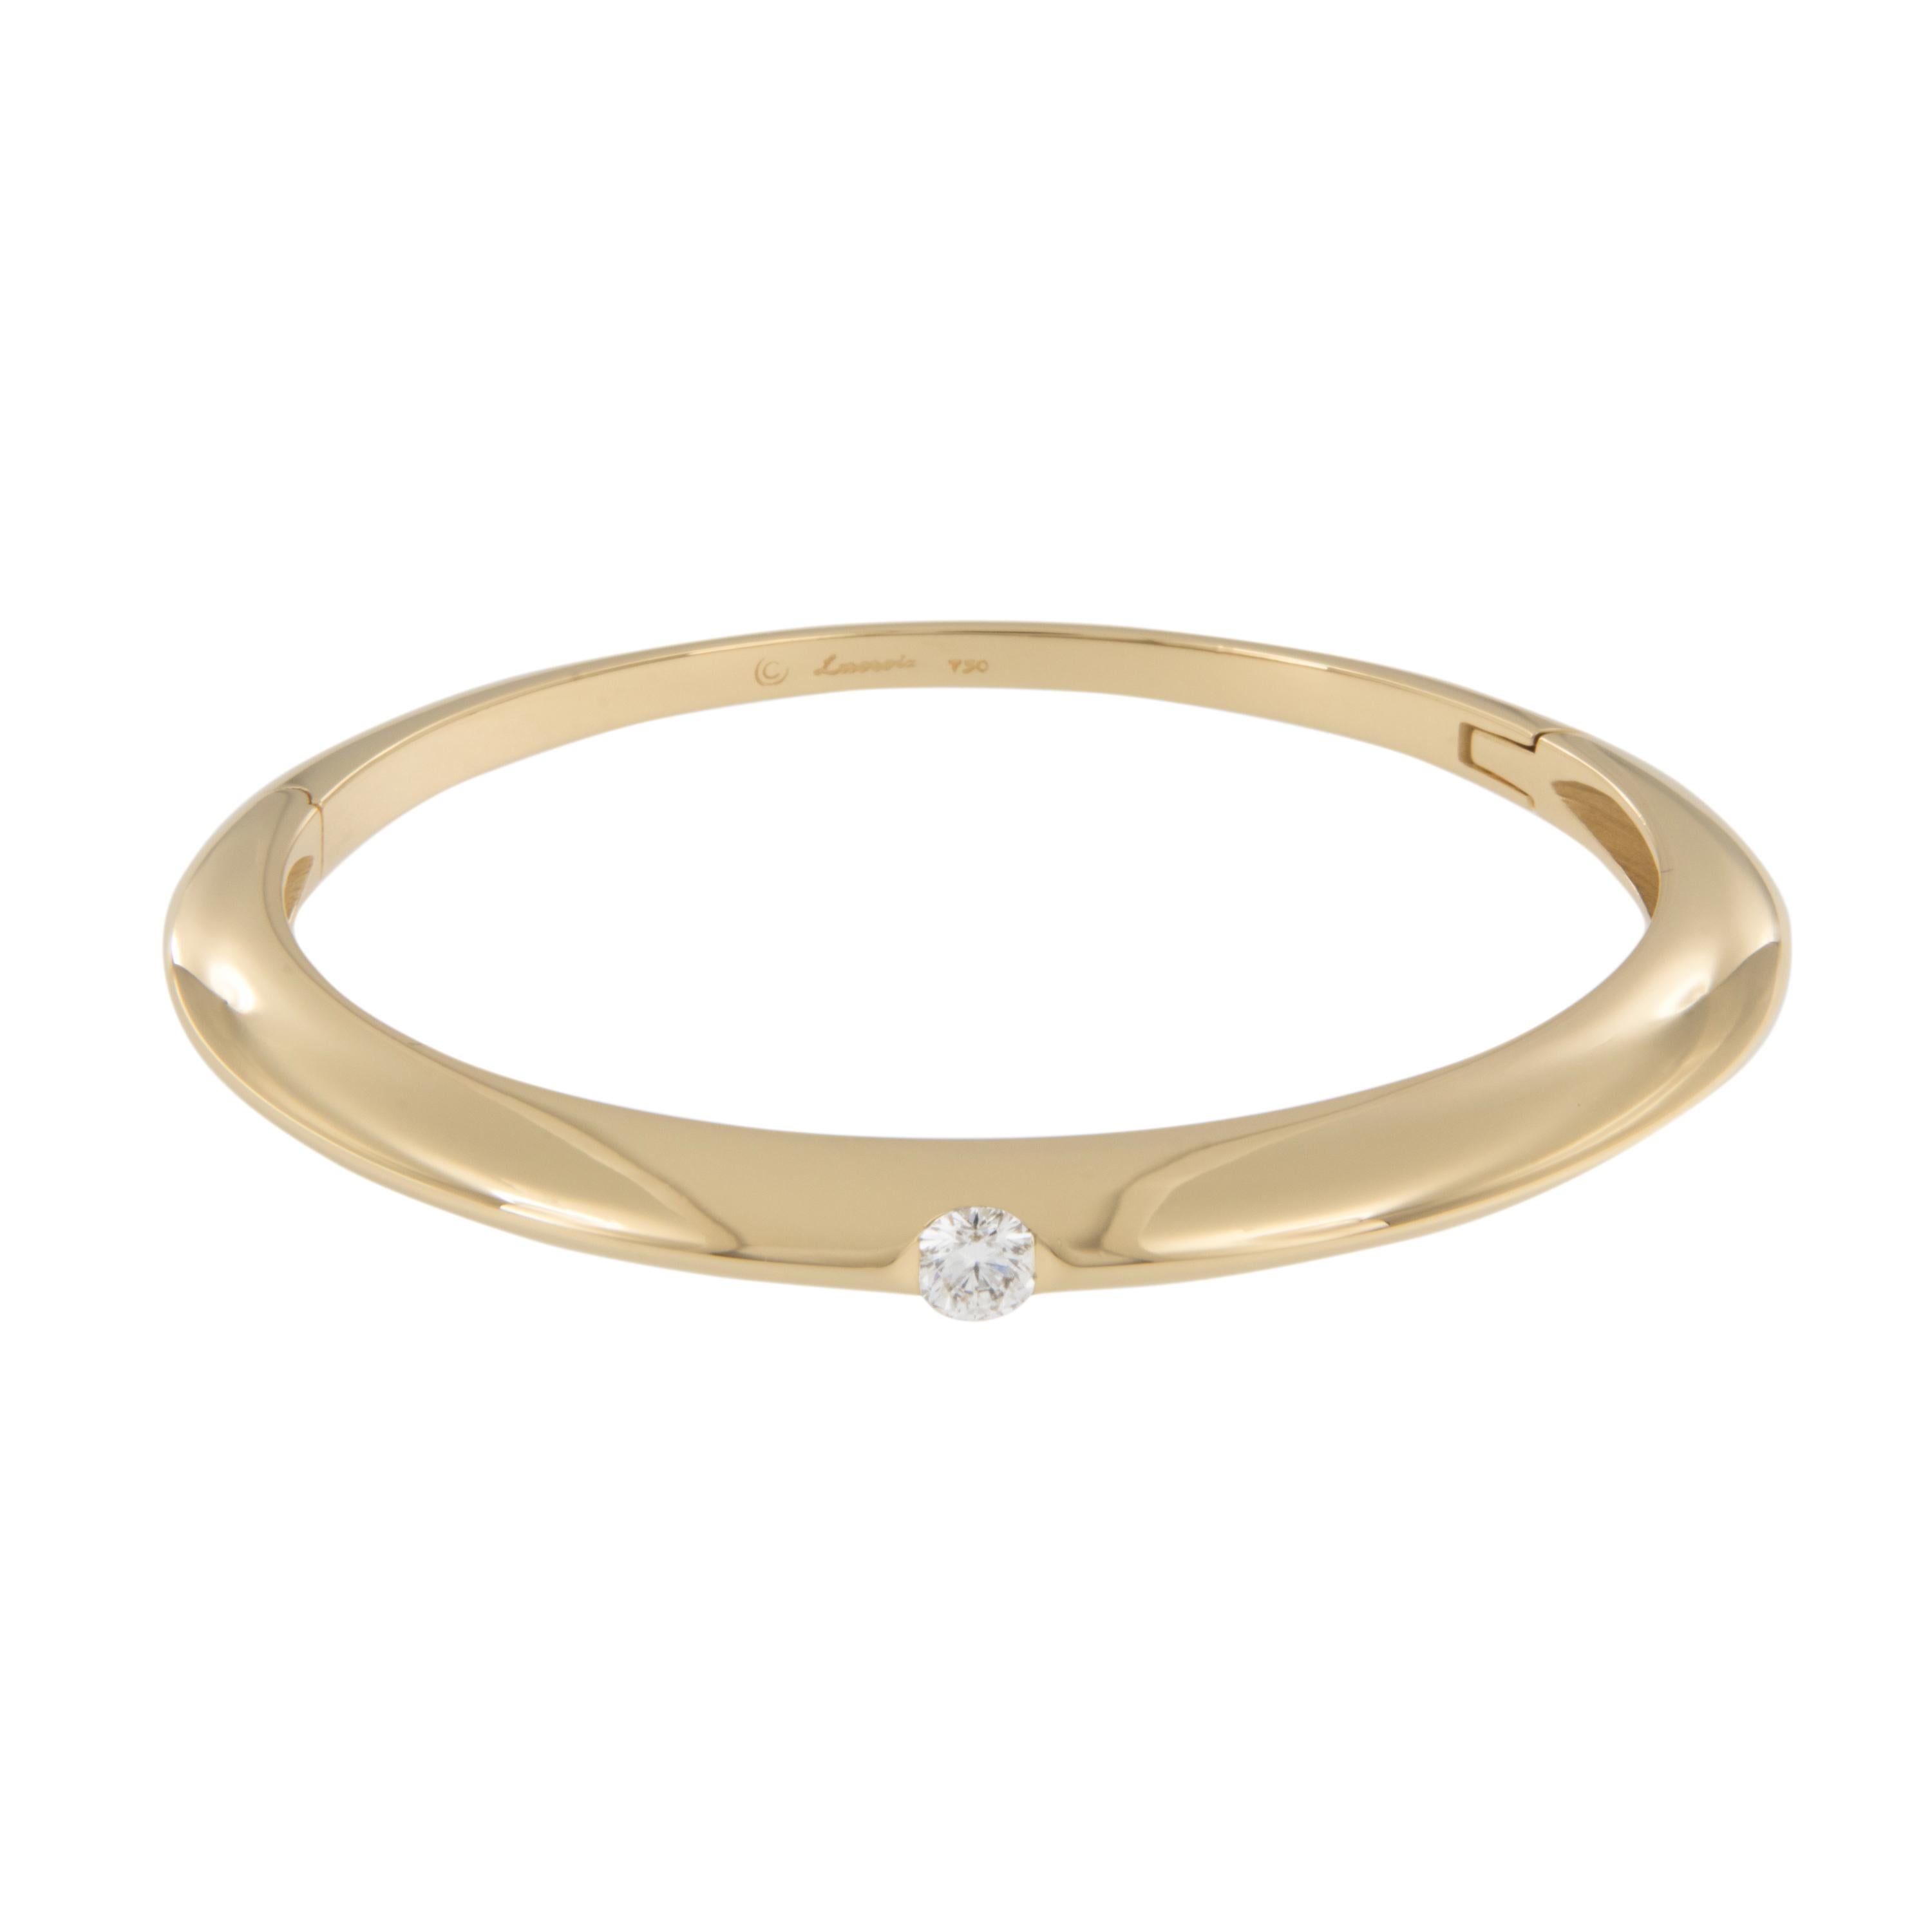 18 karat yellow gold diamond solitaire bangle designed & made by Pascal Lacroix with 0.50 Carat diamond. From the Plaza collection, this contemporary piece is just eye catching.  Artisan Pascal Lacroix has been designing and handcrafting fine